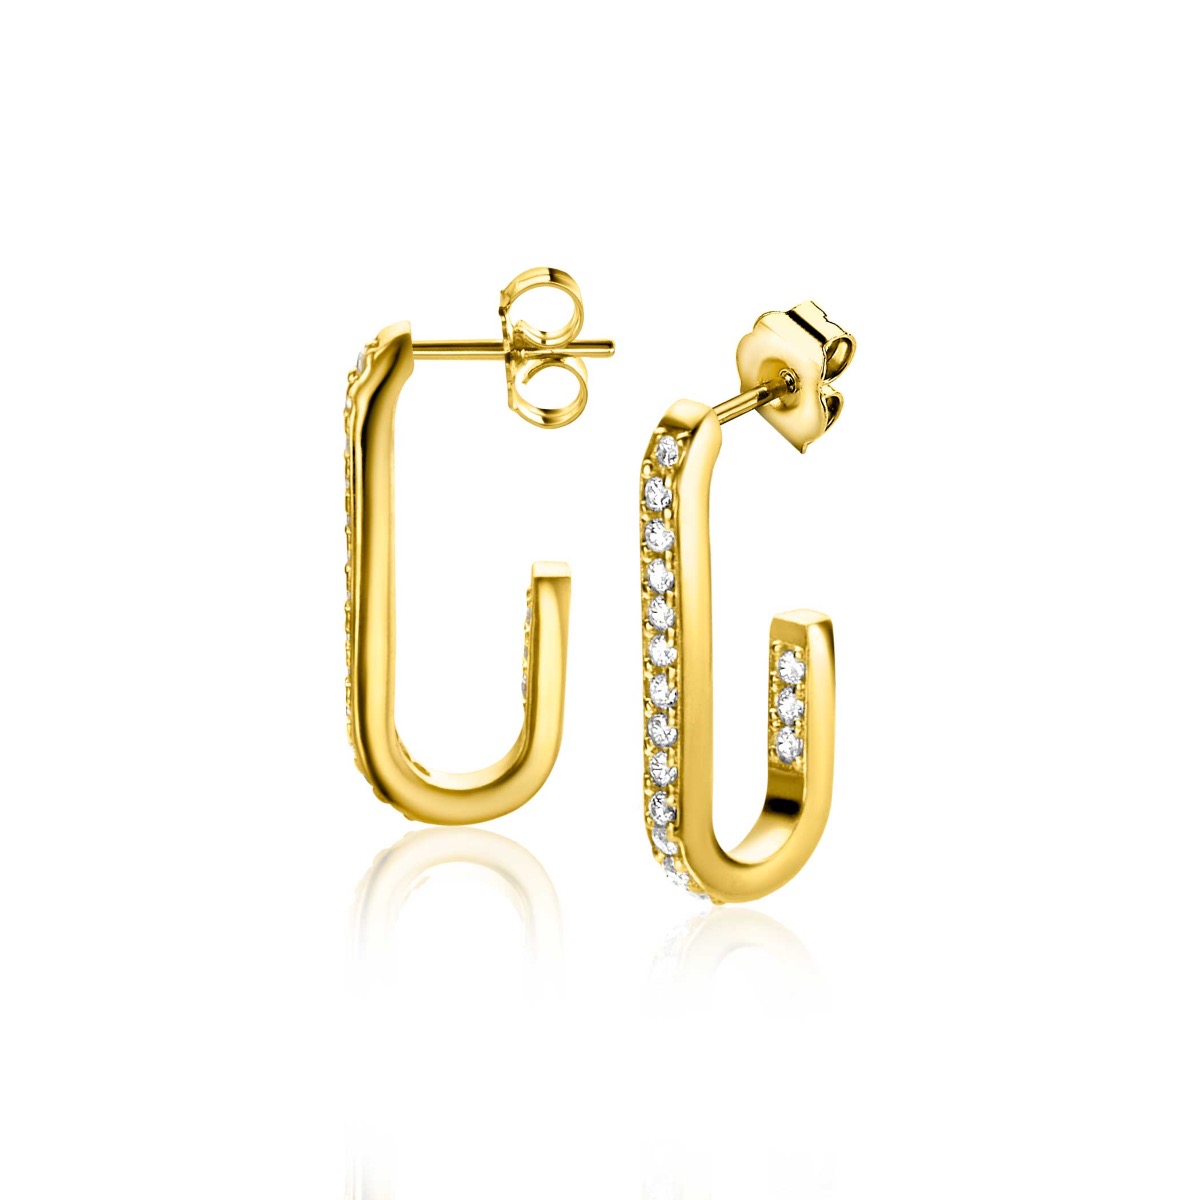 20mm ZINZI Gold Plated Sterling Silver Earrings with Oval Shape Set with White Zirconias ZIO2310Y